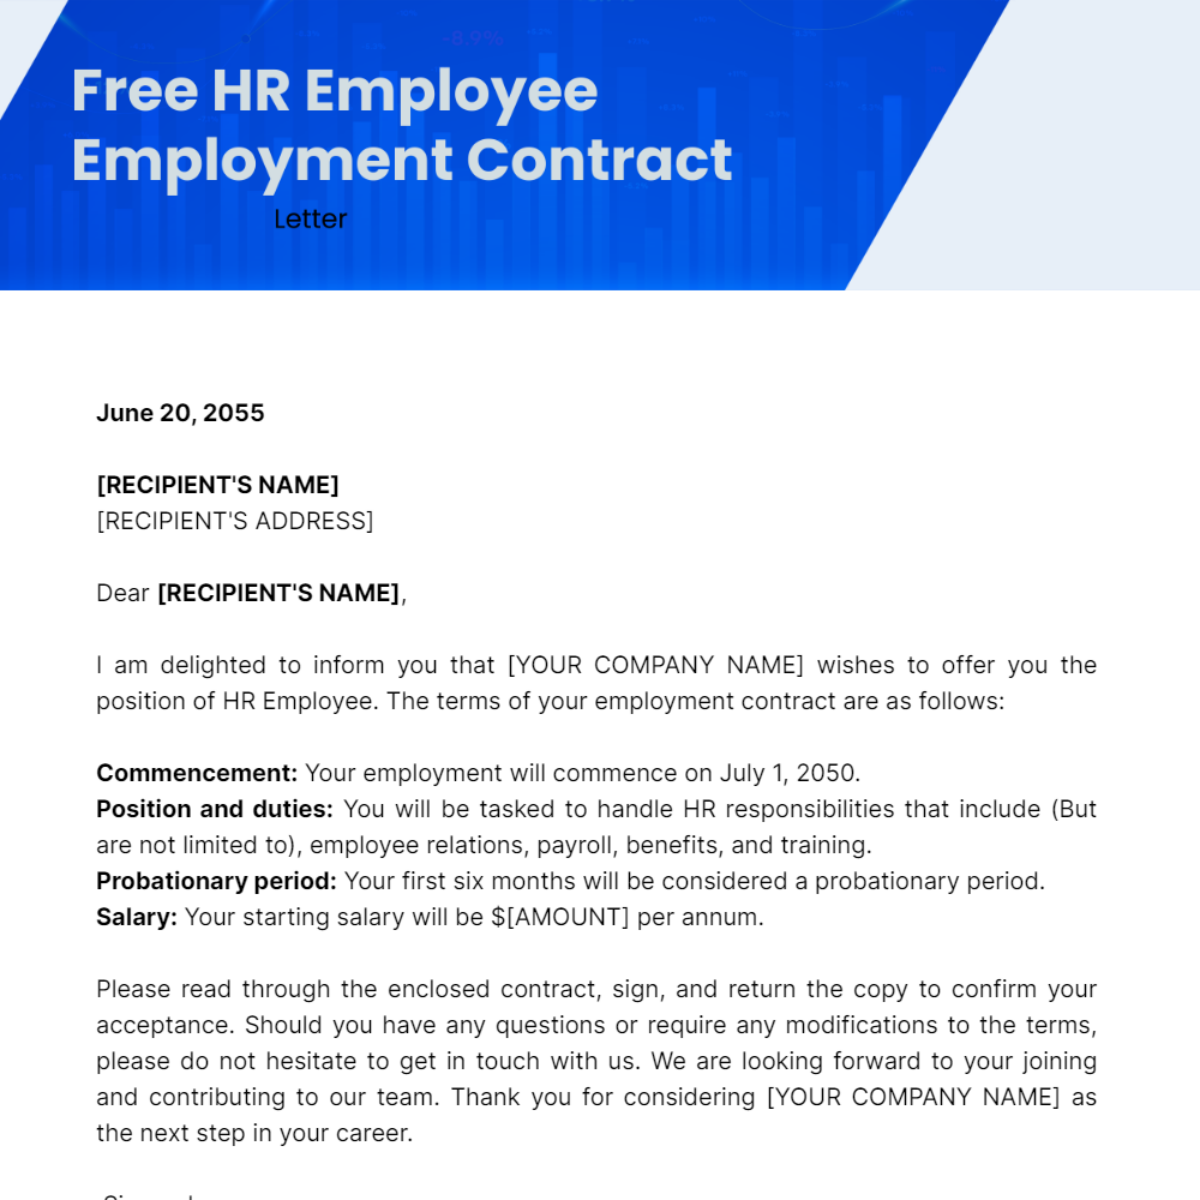 HR Employee Employment Contract Letter Template